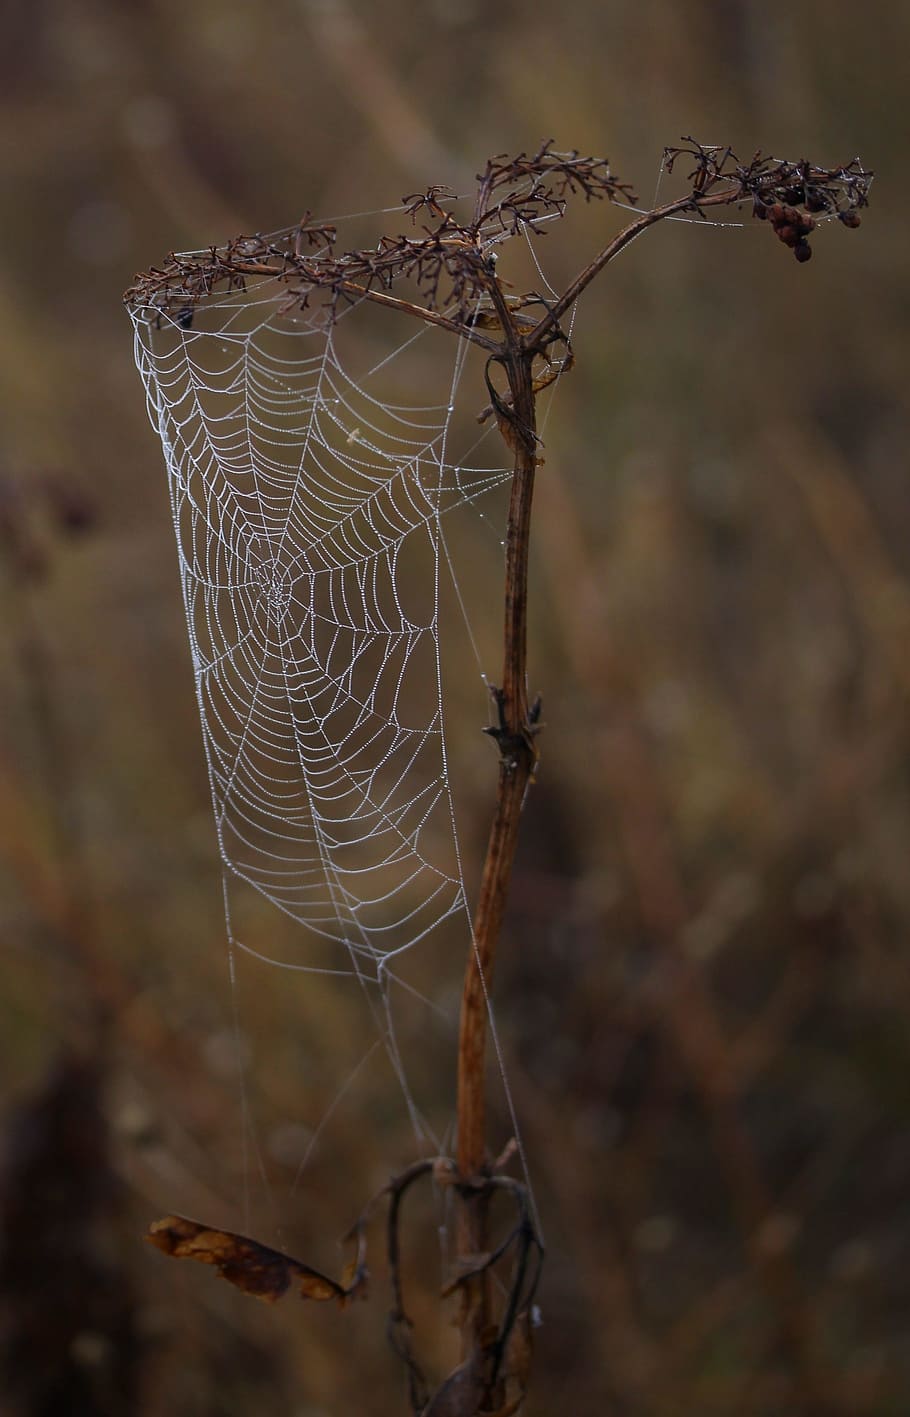 spider web, wet, hooked, place, dew, drops, nature, focus on foreground, close-up, fragility